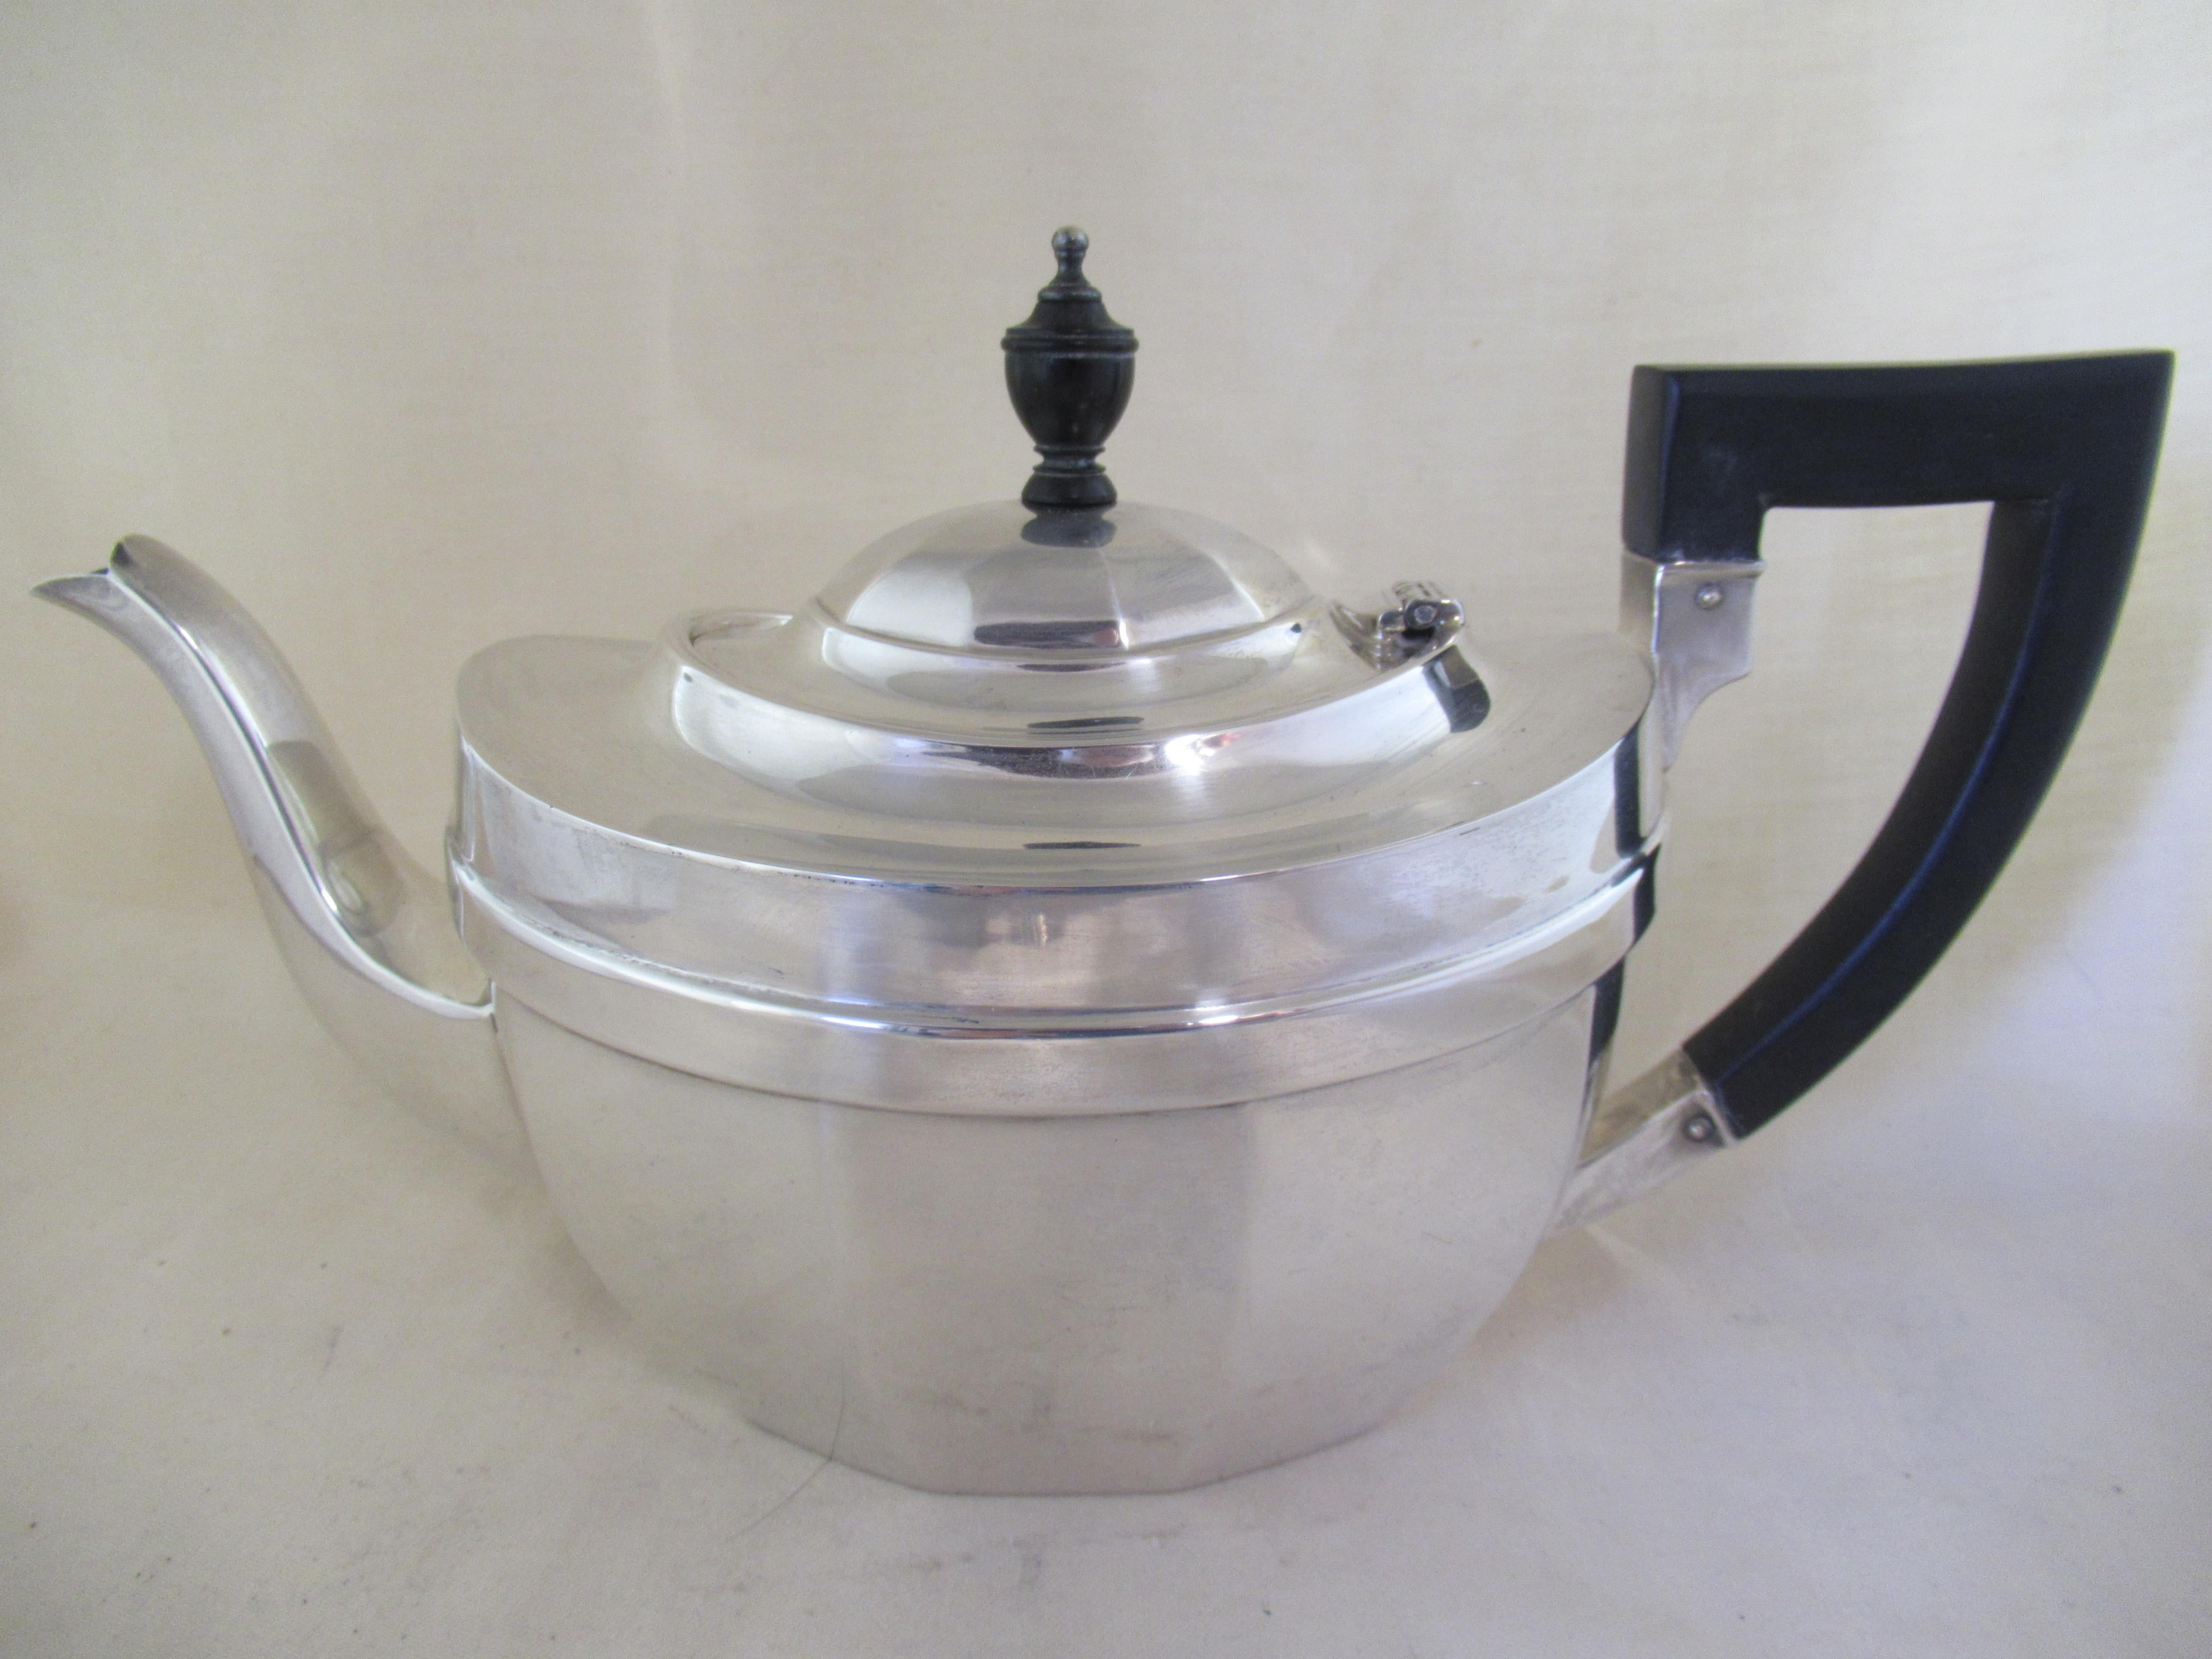 Sterling Silver THREE PIECE TEASET - TEAPOT, SUGAR & CREAM
All three pieces are by Barker Brothers, but the teapot and sugar bowl have a different set of hallmarks to the cream jug.

Teapot & Sugar Bowl:- 3 Sheaves & Sword - Assay office Mark at